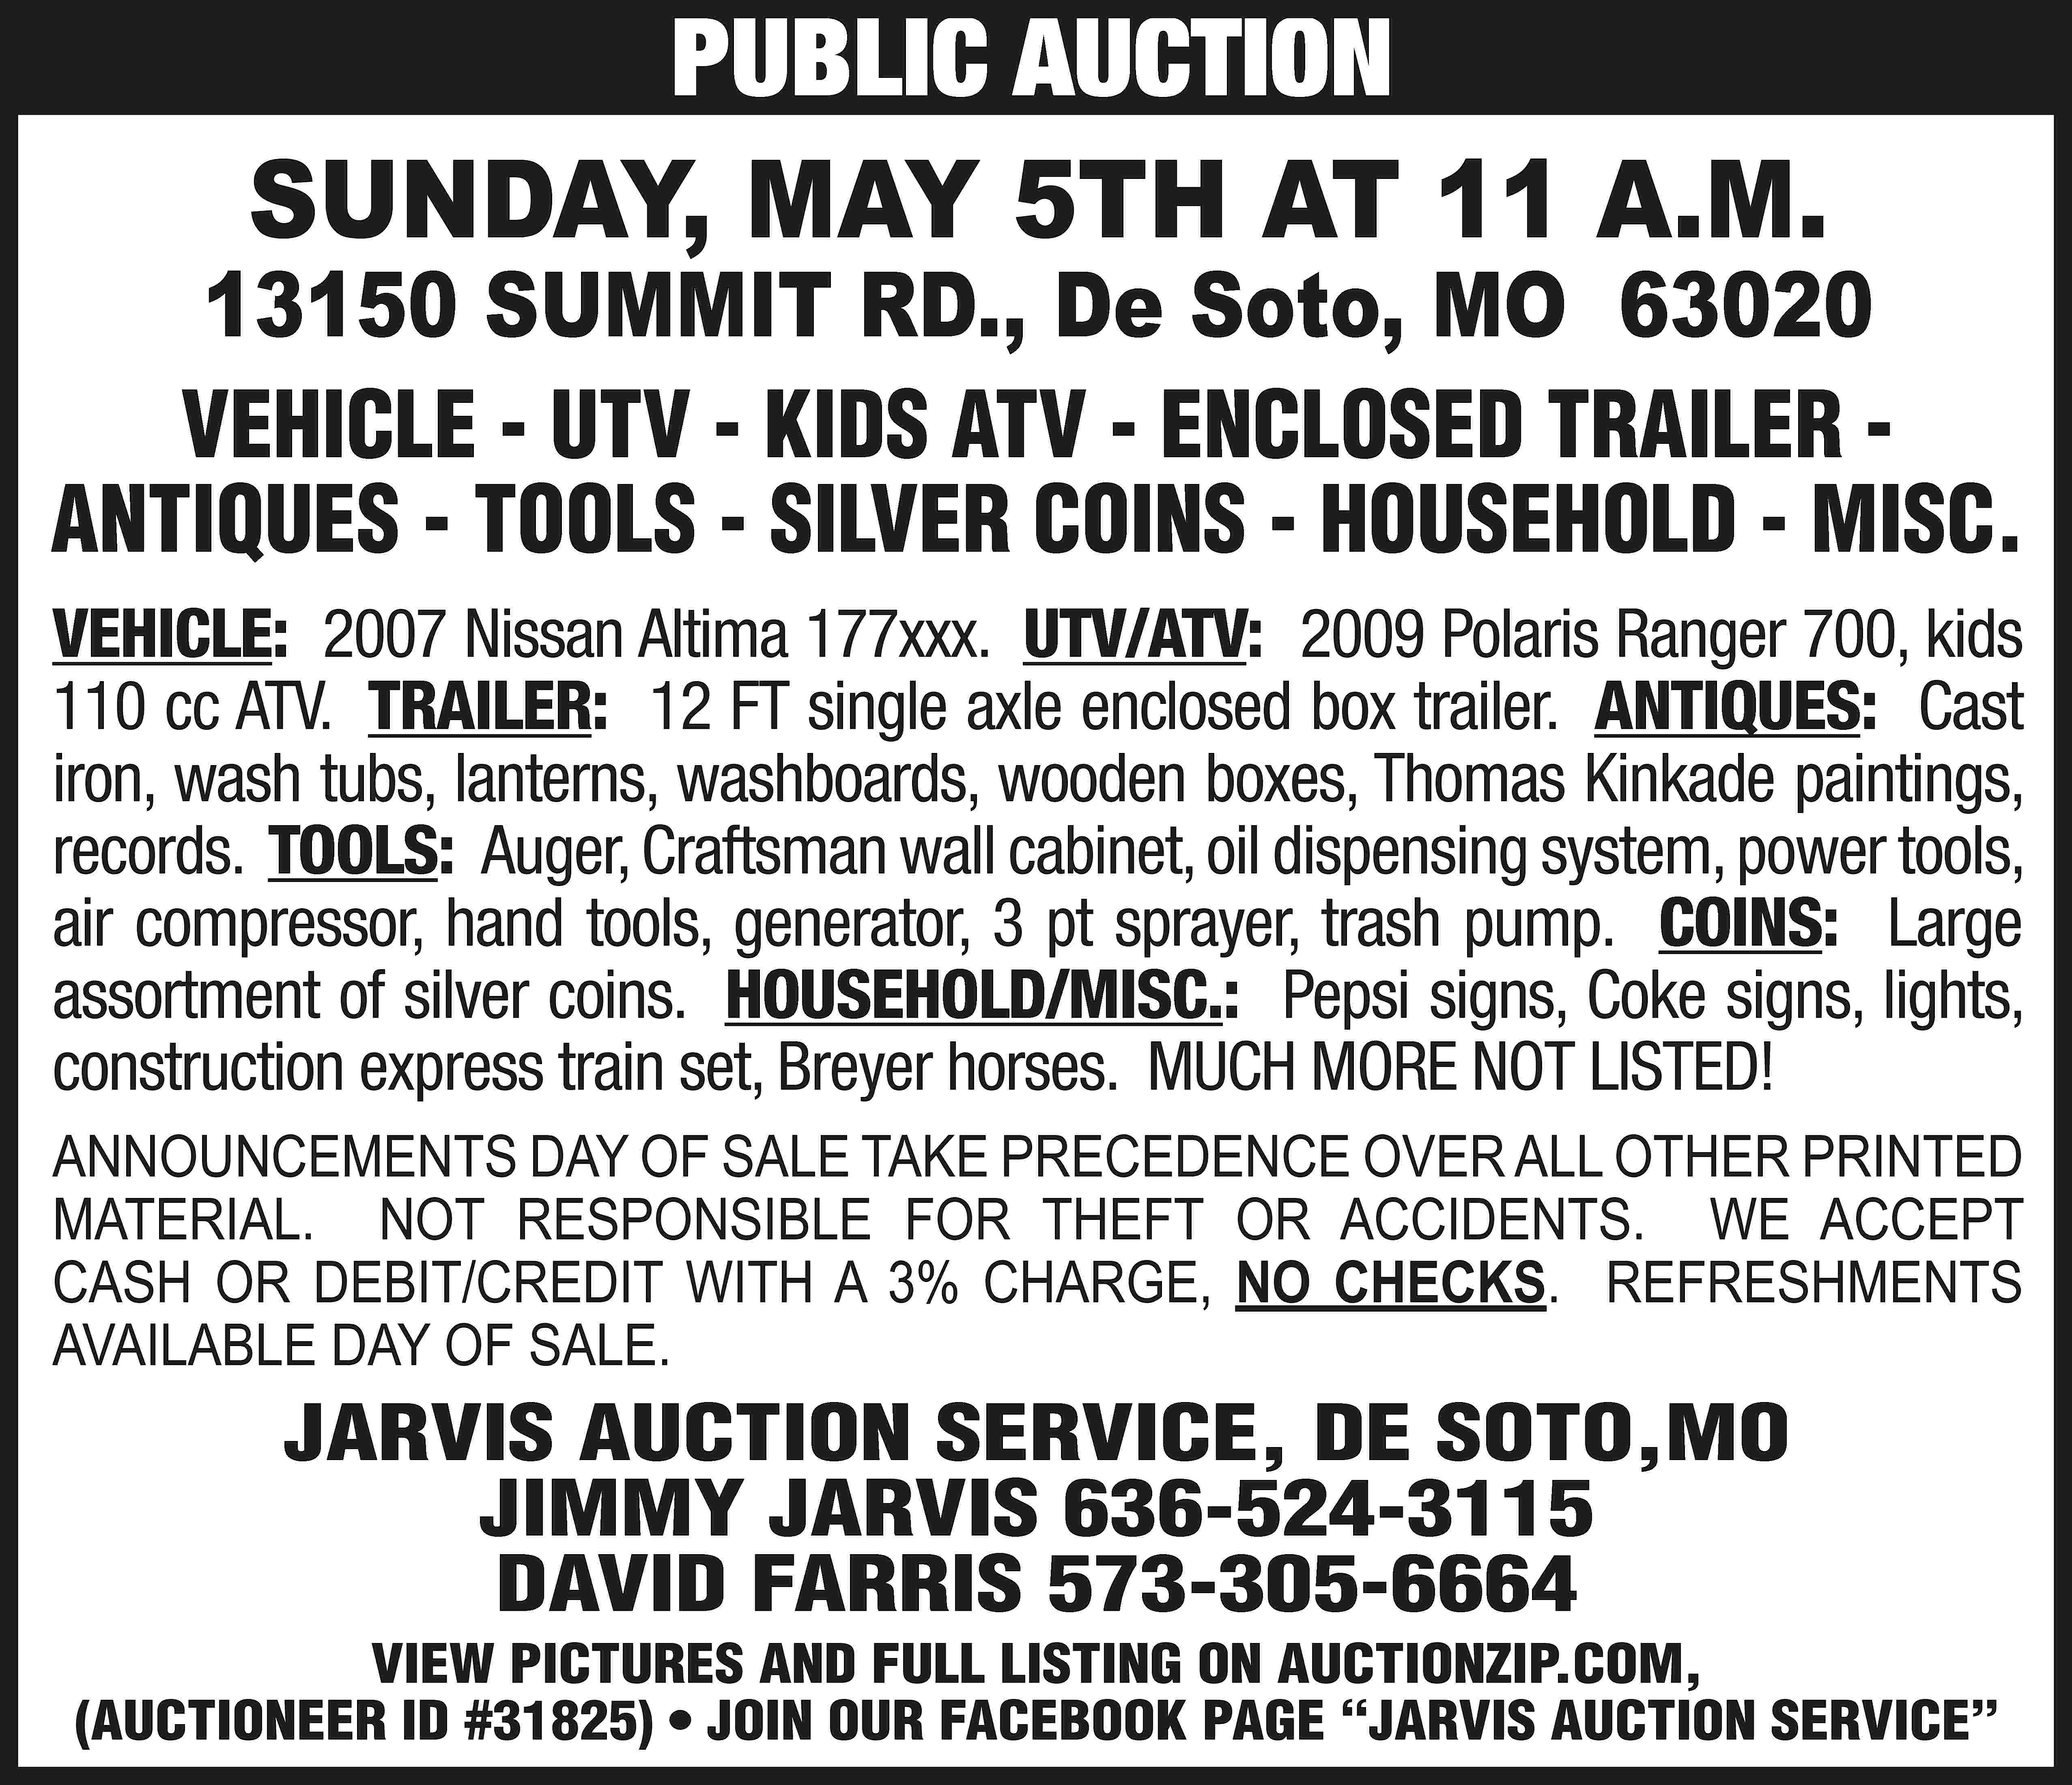 PUBLIC AUCTION SUNDAY, MAY 5TH  PUBLIC AUCTION SUNDAY, MAY 5TH AT 11 A.M. 13150 SUMMIT RD., De Soto, MO 63020 VEHICLE - UTV - KIDS ATV - ENCLOSED TRAILER ANTIQUES - TOOLS - SILVER COINS - HOUSEHOLD - MISC. VEHICLE: 2007 Nissan Altima 177xxx. UTV/ATV: 2009 Polaris Ranger 700, kids 110 cc ATV. TRAILER: 12 FT single axle enclosed box trailer. ANTIQUES: Cast iron, wash tubs, lanterns, washboards, wooden boxes, Thomas Kinkade paintings, records. TOOLS: Auger, Craftsman wall cabinet, oil dispensing system, power tools, air compressor, hand tools, generator, 3 pt sprayer, trash pump. COINS: Large assortment of silver coins. HOUSEHOLD/MISC.: Pepsi signs, Coke signs, lights, construction express train set, Breyer horses. MUCH MORE NOT LISTED! ANNOUNCEMENTS DAY OF SALE TAKE PRECEDENCE OVER ALL OTHER PRINTED MATERIAL. NOT RESPONSIBLE FOR THEFT OR ACCIDENTS. WE ACCEPT CASH OR DEBIT/CREDIT WITH A 3% CHARGE, NO CHECKS. REFRESHMENTS AVAILABLE DAY OF SALE. JARVIS AUCTION SERVICE, DE SOTO,MO JIMMY JARVIS 636-524-3115 DAVID FARRIS 573-305-6664 VIEW PICTURES AND FULL LISTING ON AUCTIONZIP.COM, (AUCTIONEER ID #31825) • JOIN OUR FACEBOOK PAGE “JARVIS AUCTION SERVICE”